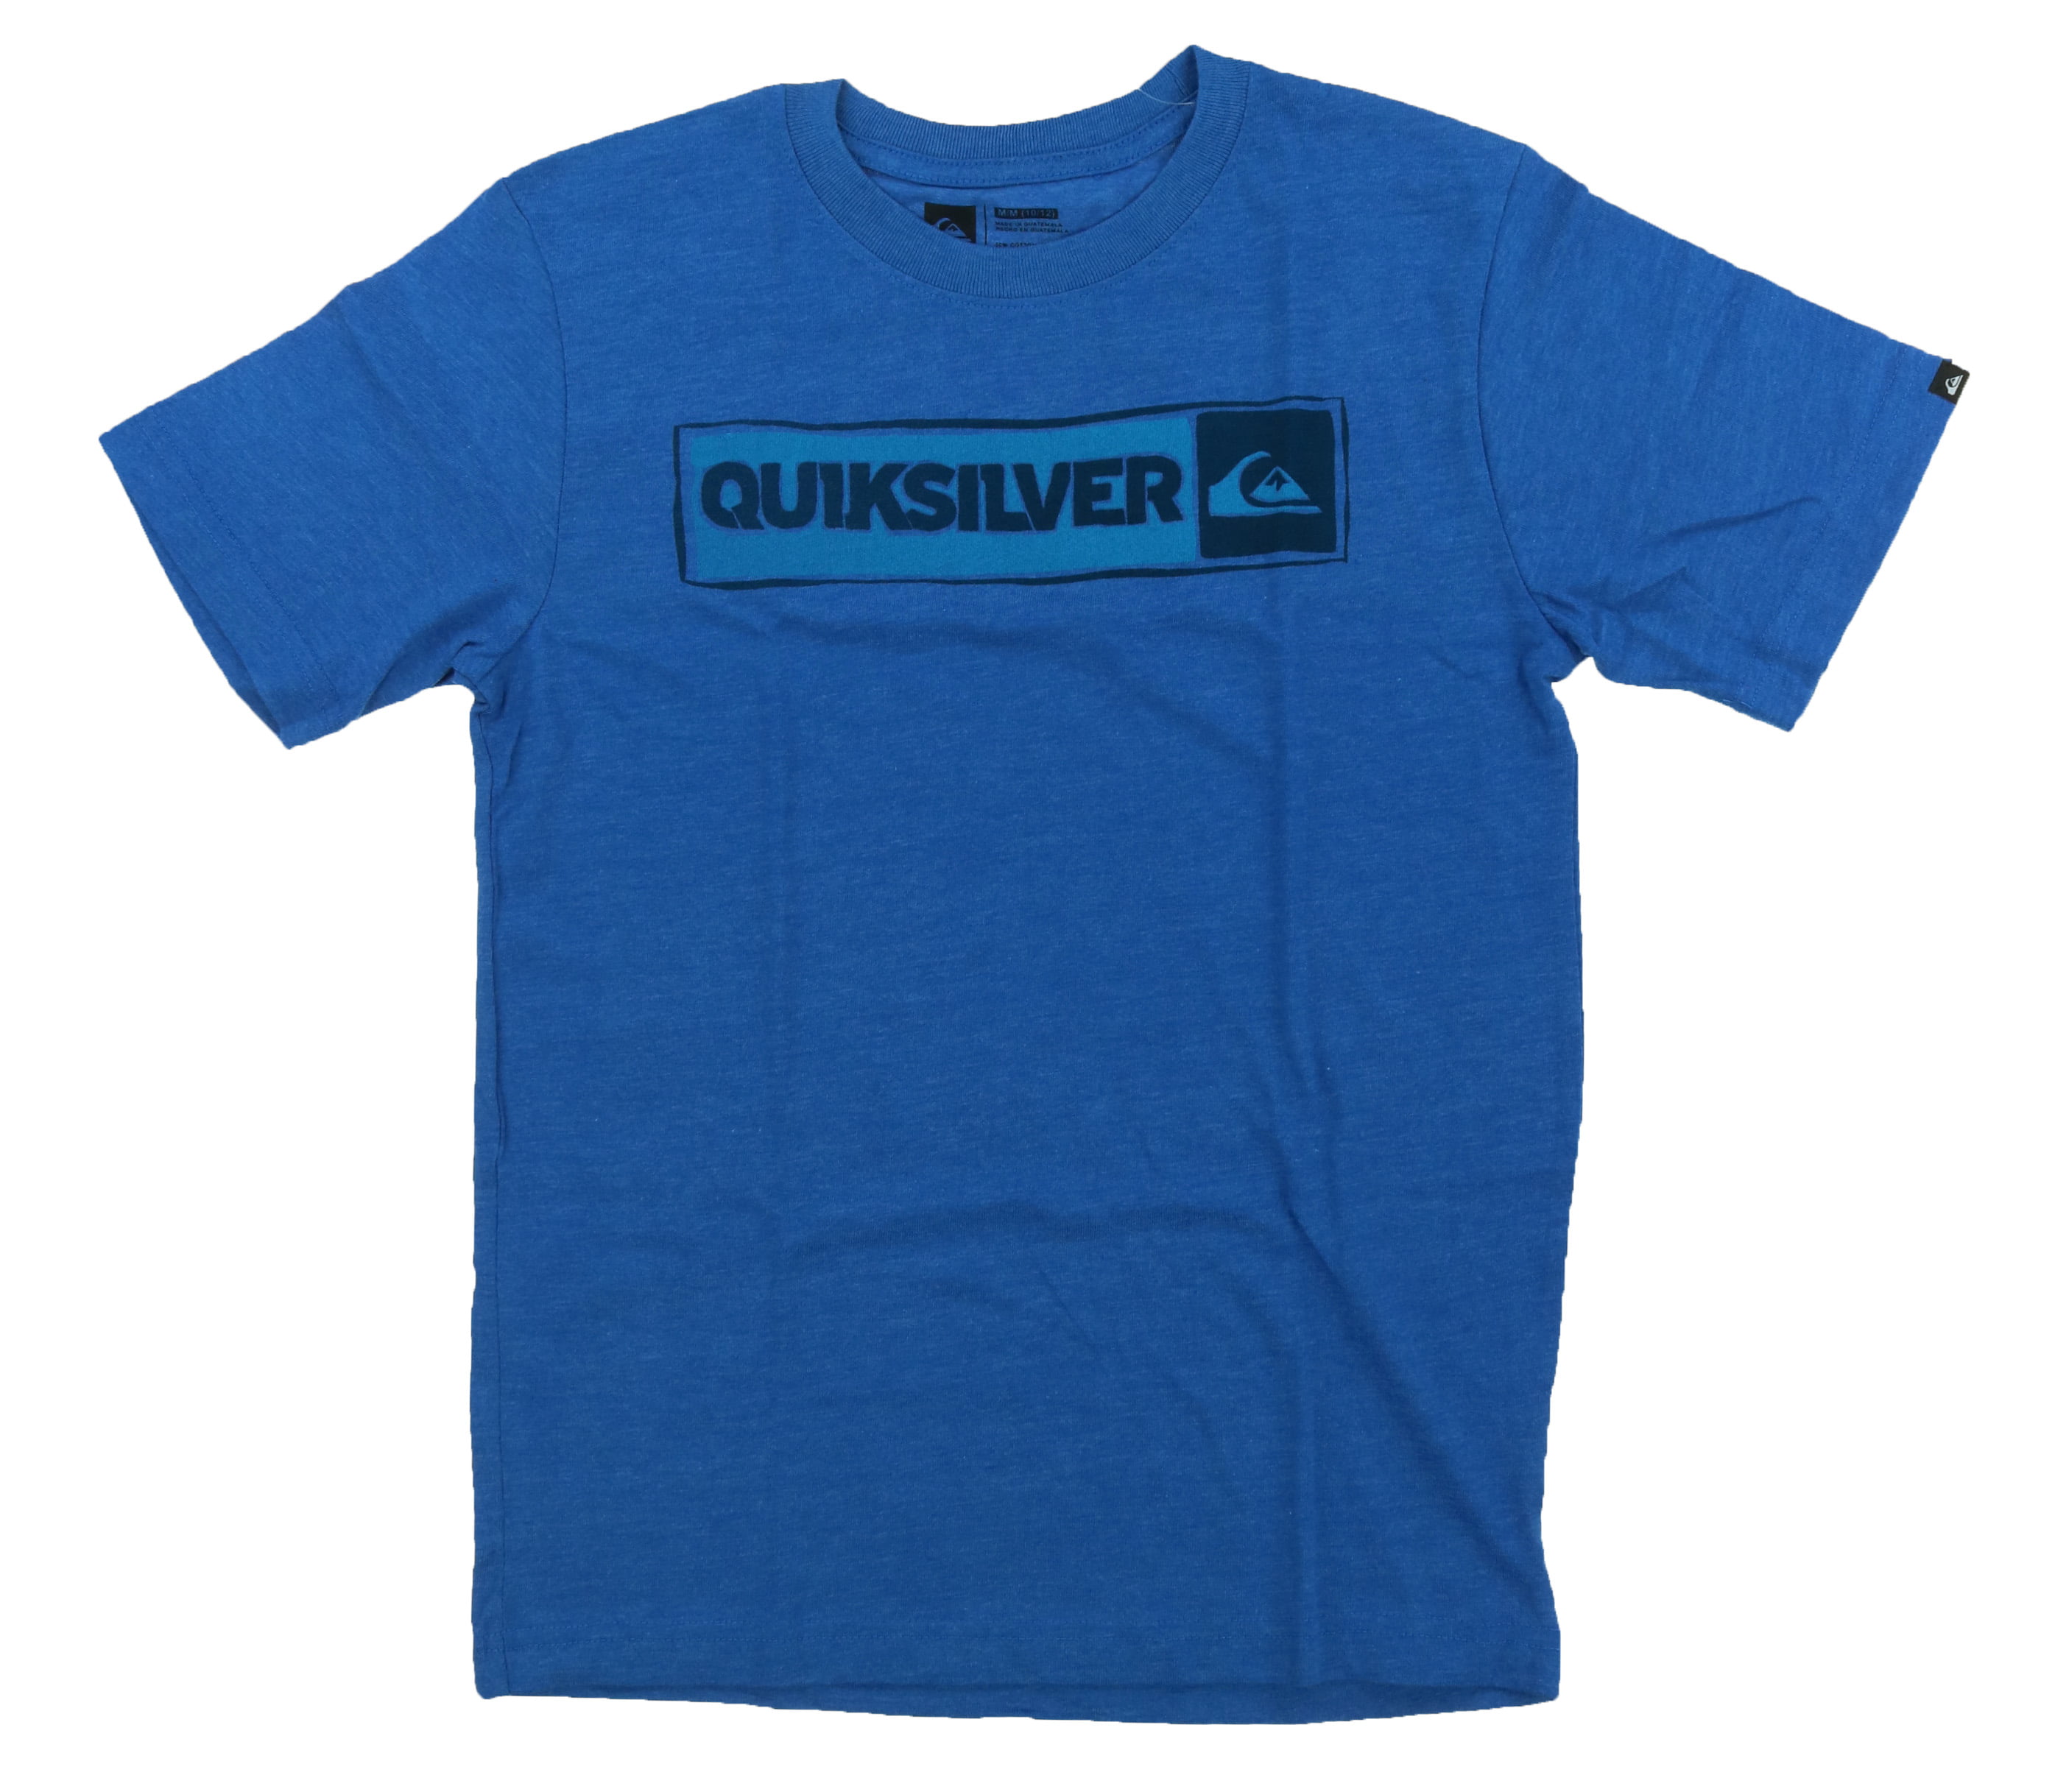 Quiksilver logo embroidery roblox